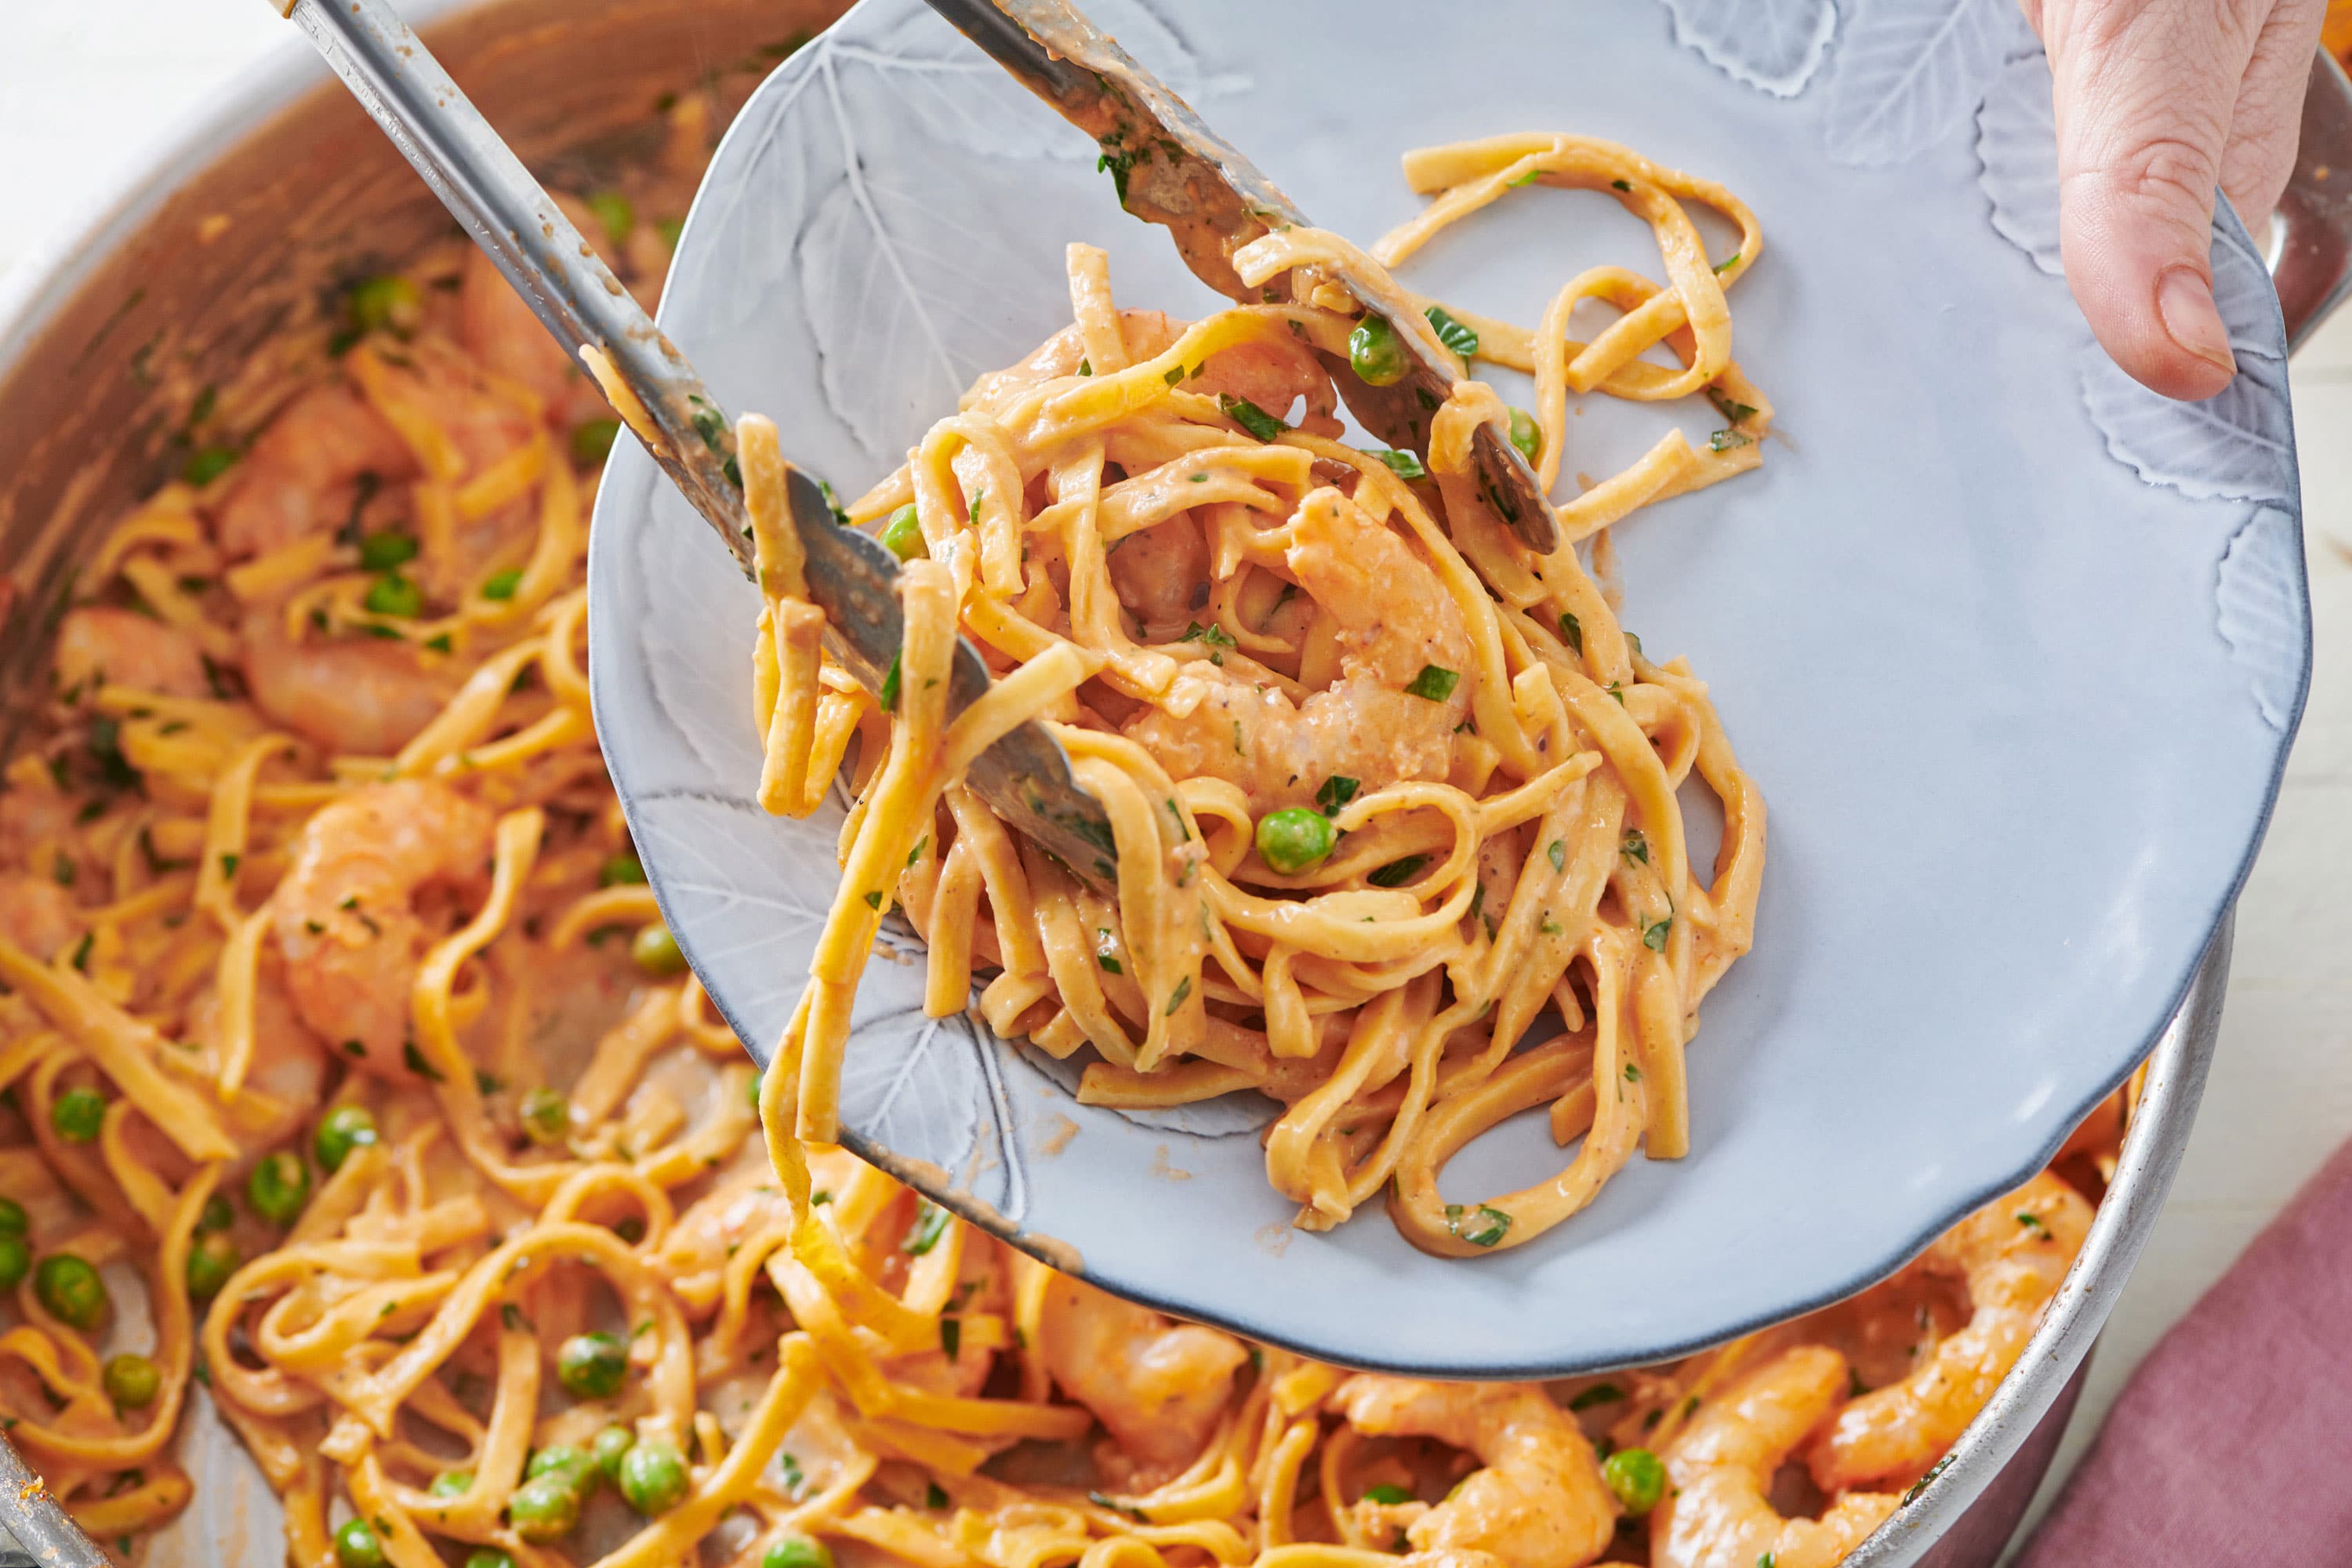 Tongs serving fresh linguine with shrimp and peas in a pink cream sauce onto a plate.